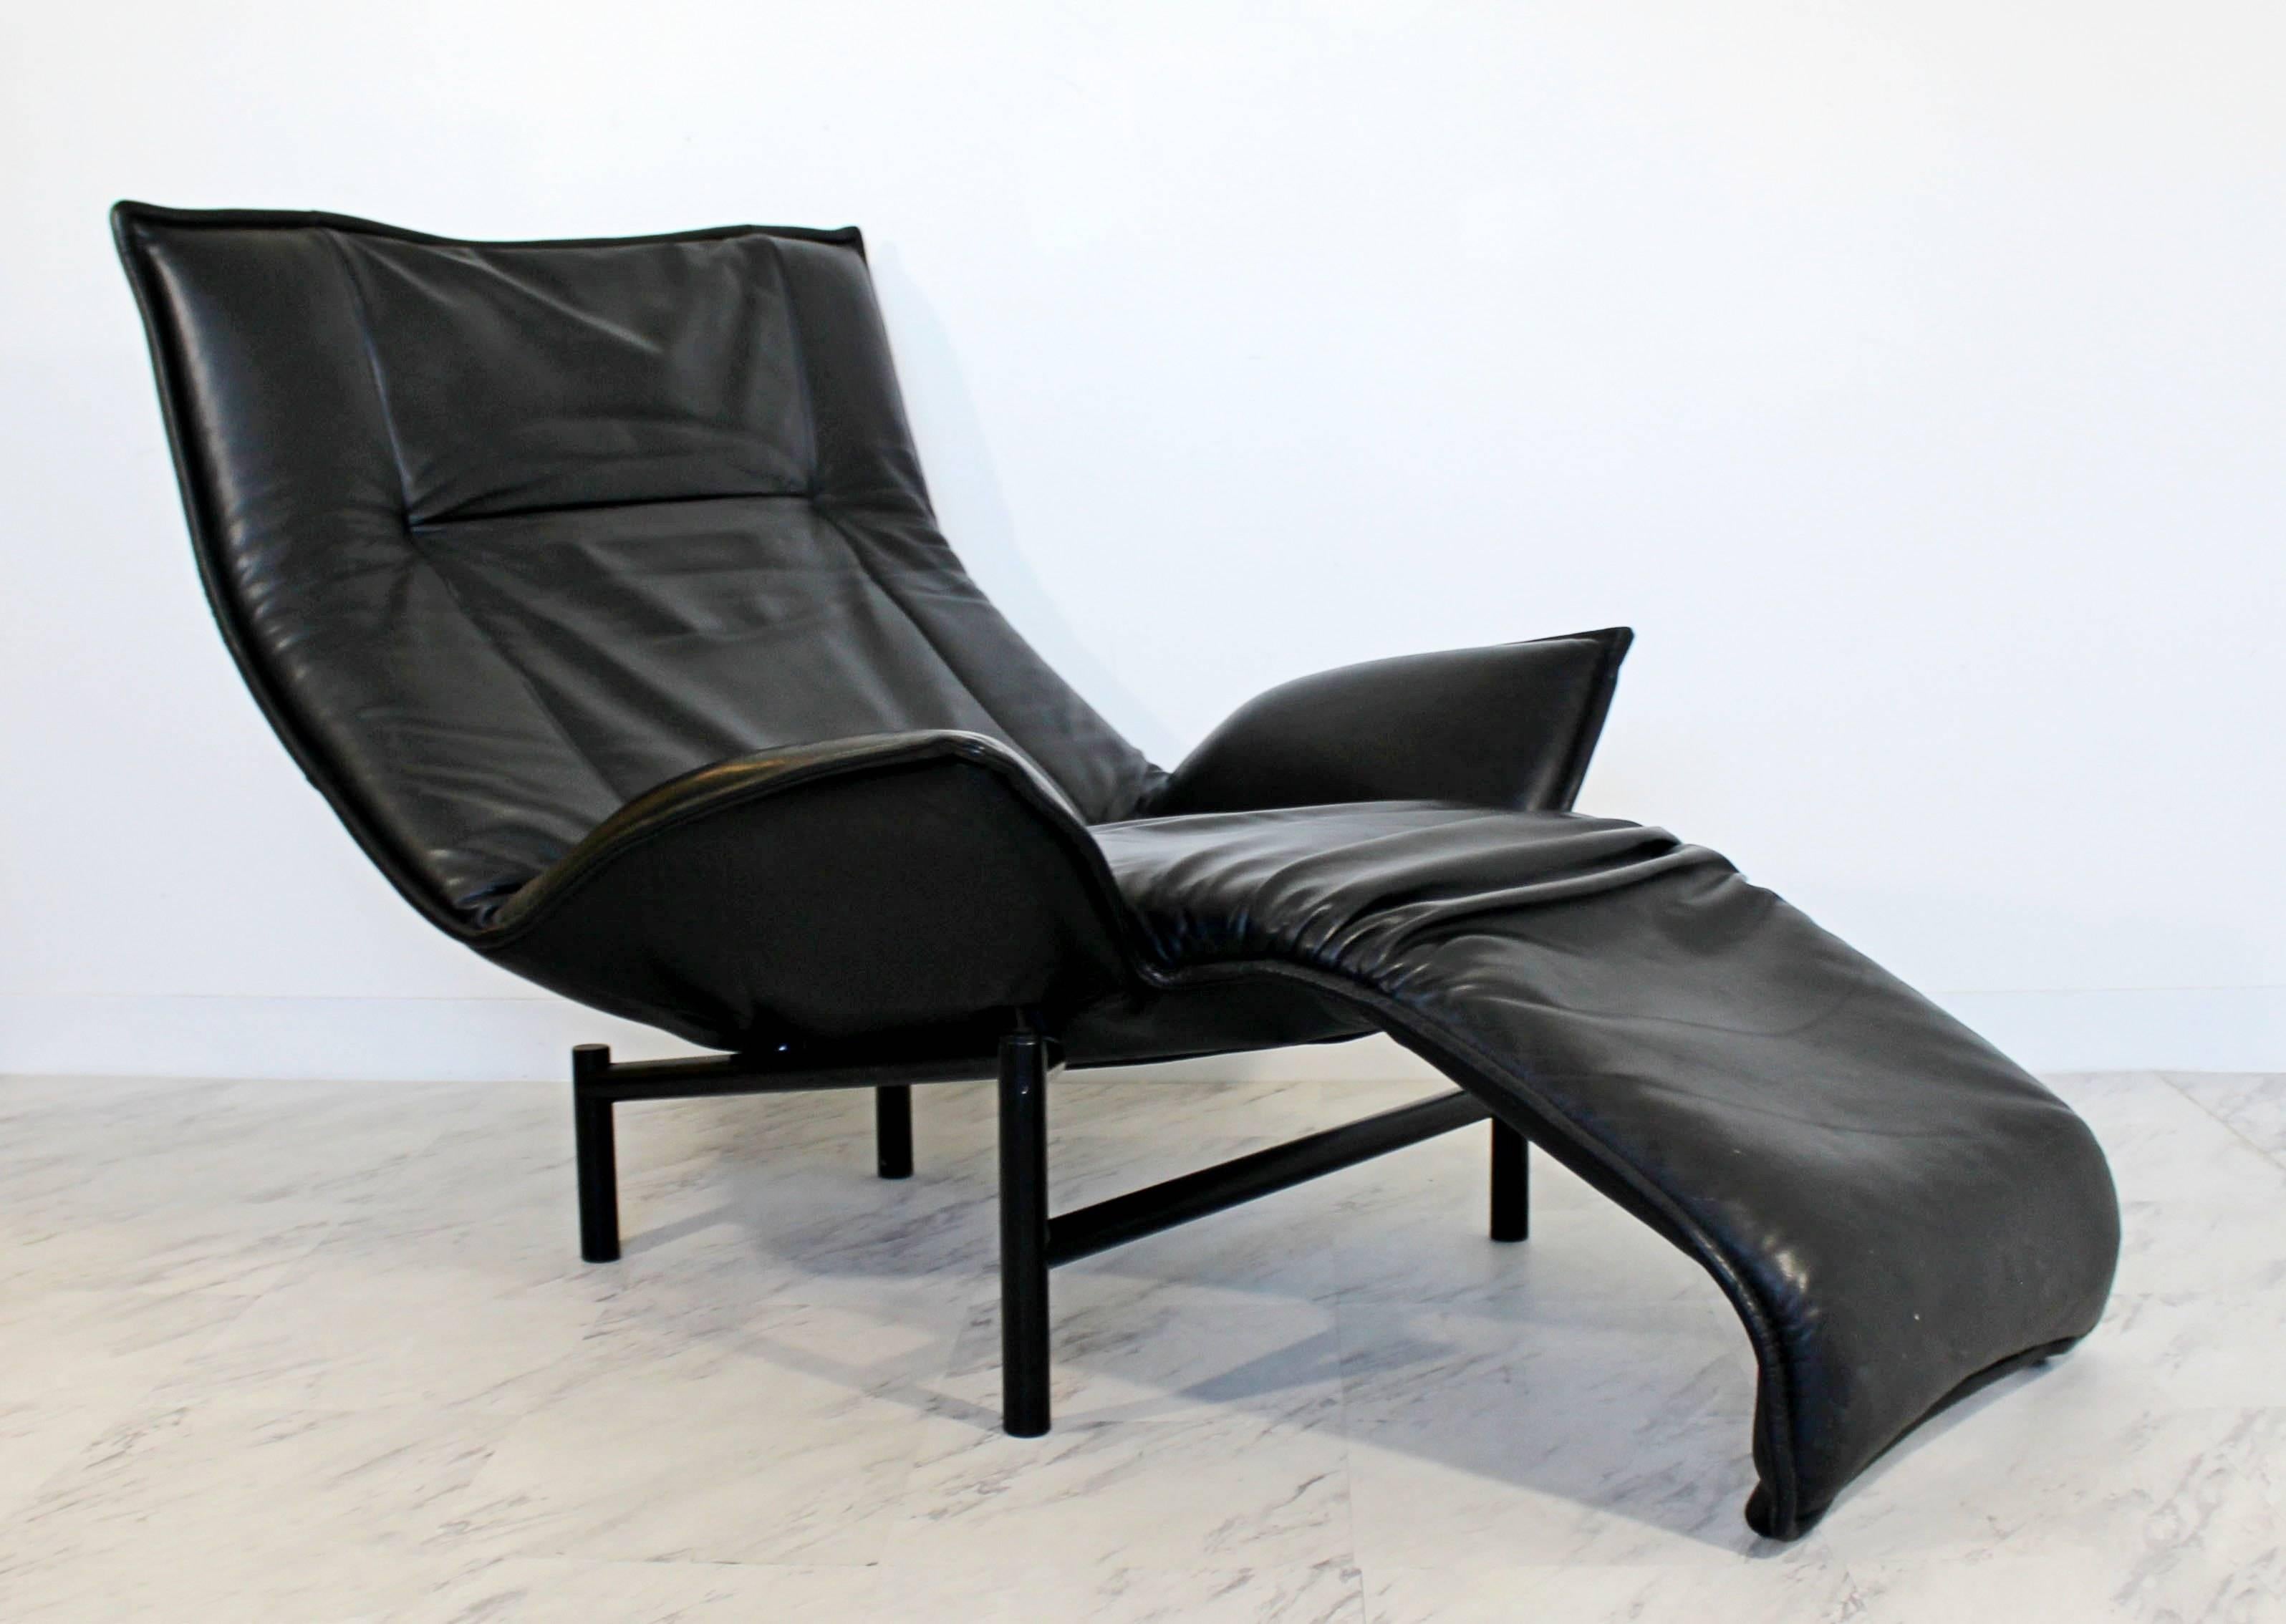 Late 20th Century Mid-Century Modern Black Leather Recliner Lounge Chairs Magistretti for Cassina